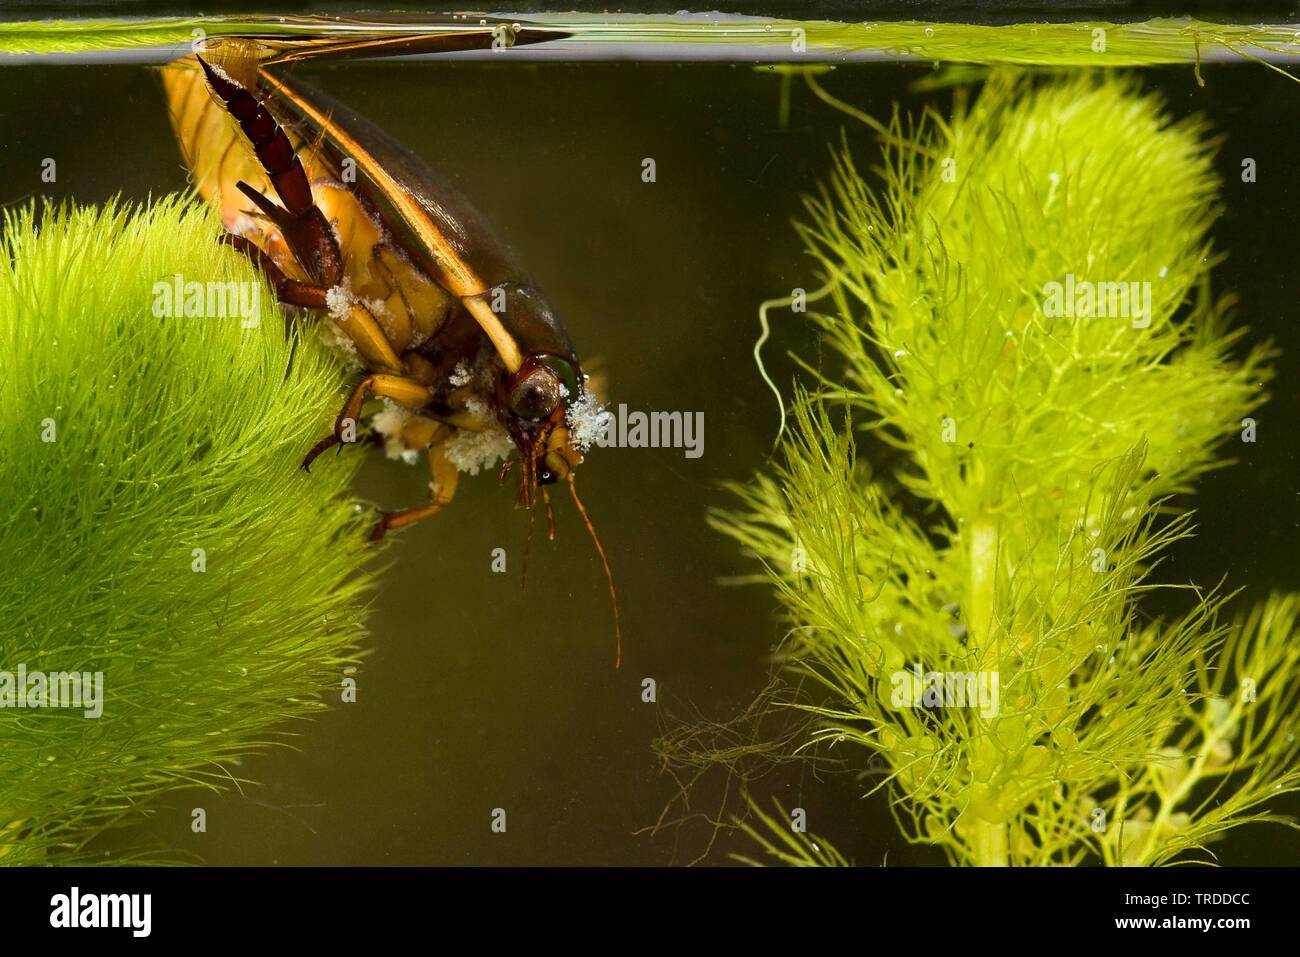 Diving Beetle (Cybister lateralimarginalis, Scaphinectes lateralimarginalis), in aquatic plant, Netherlands Stock Photo